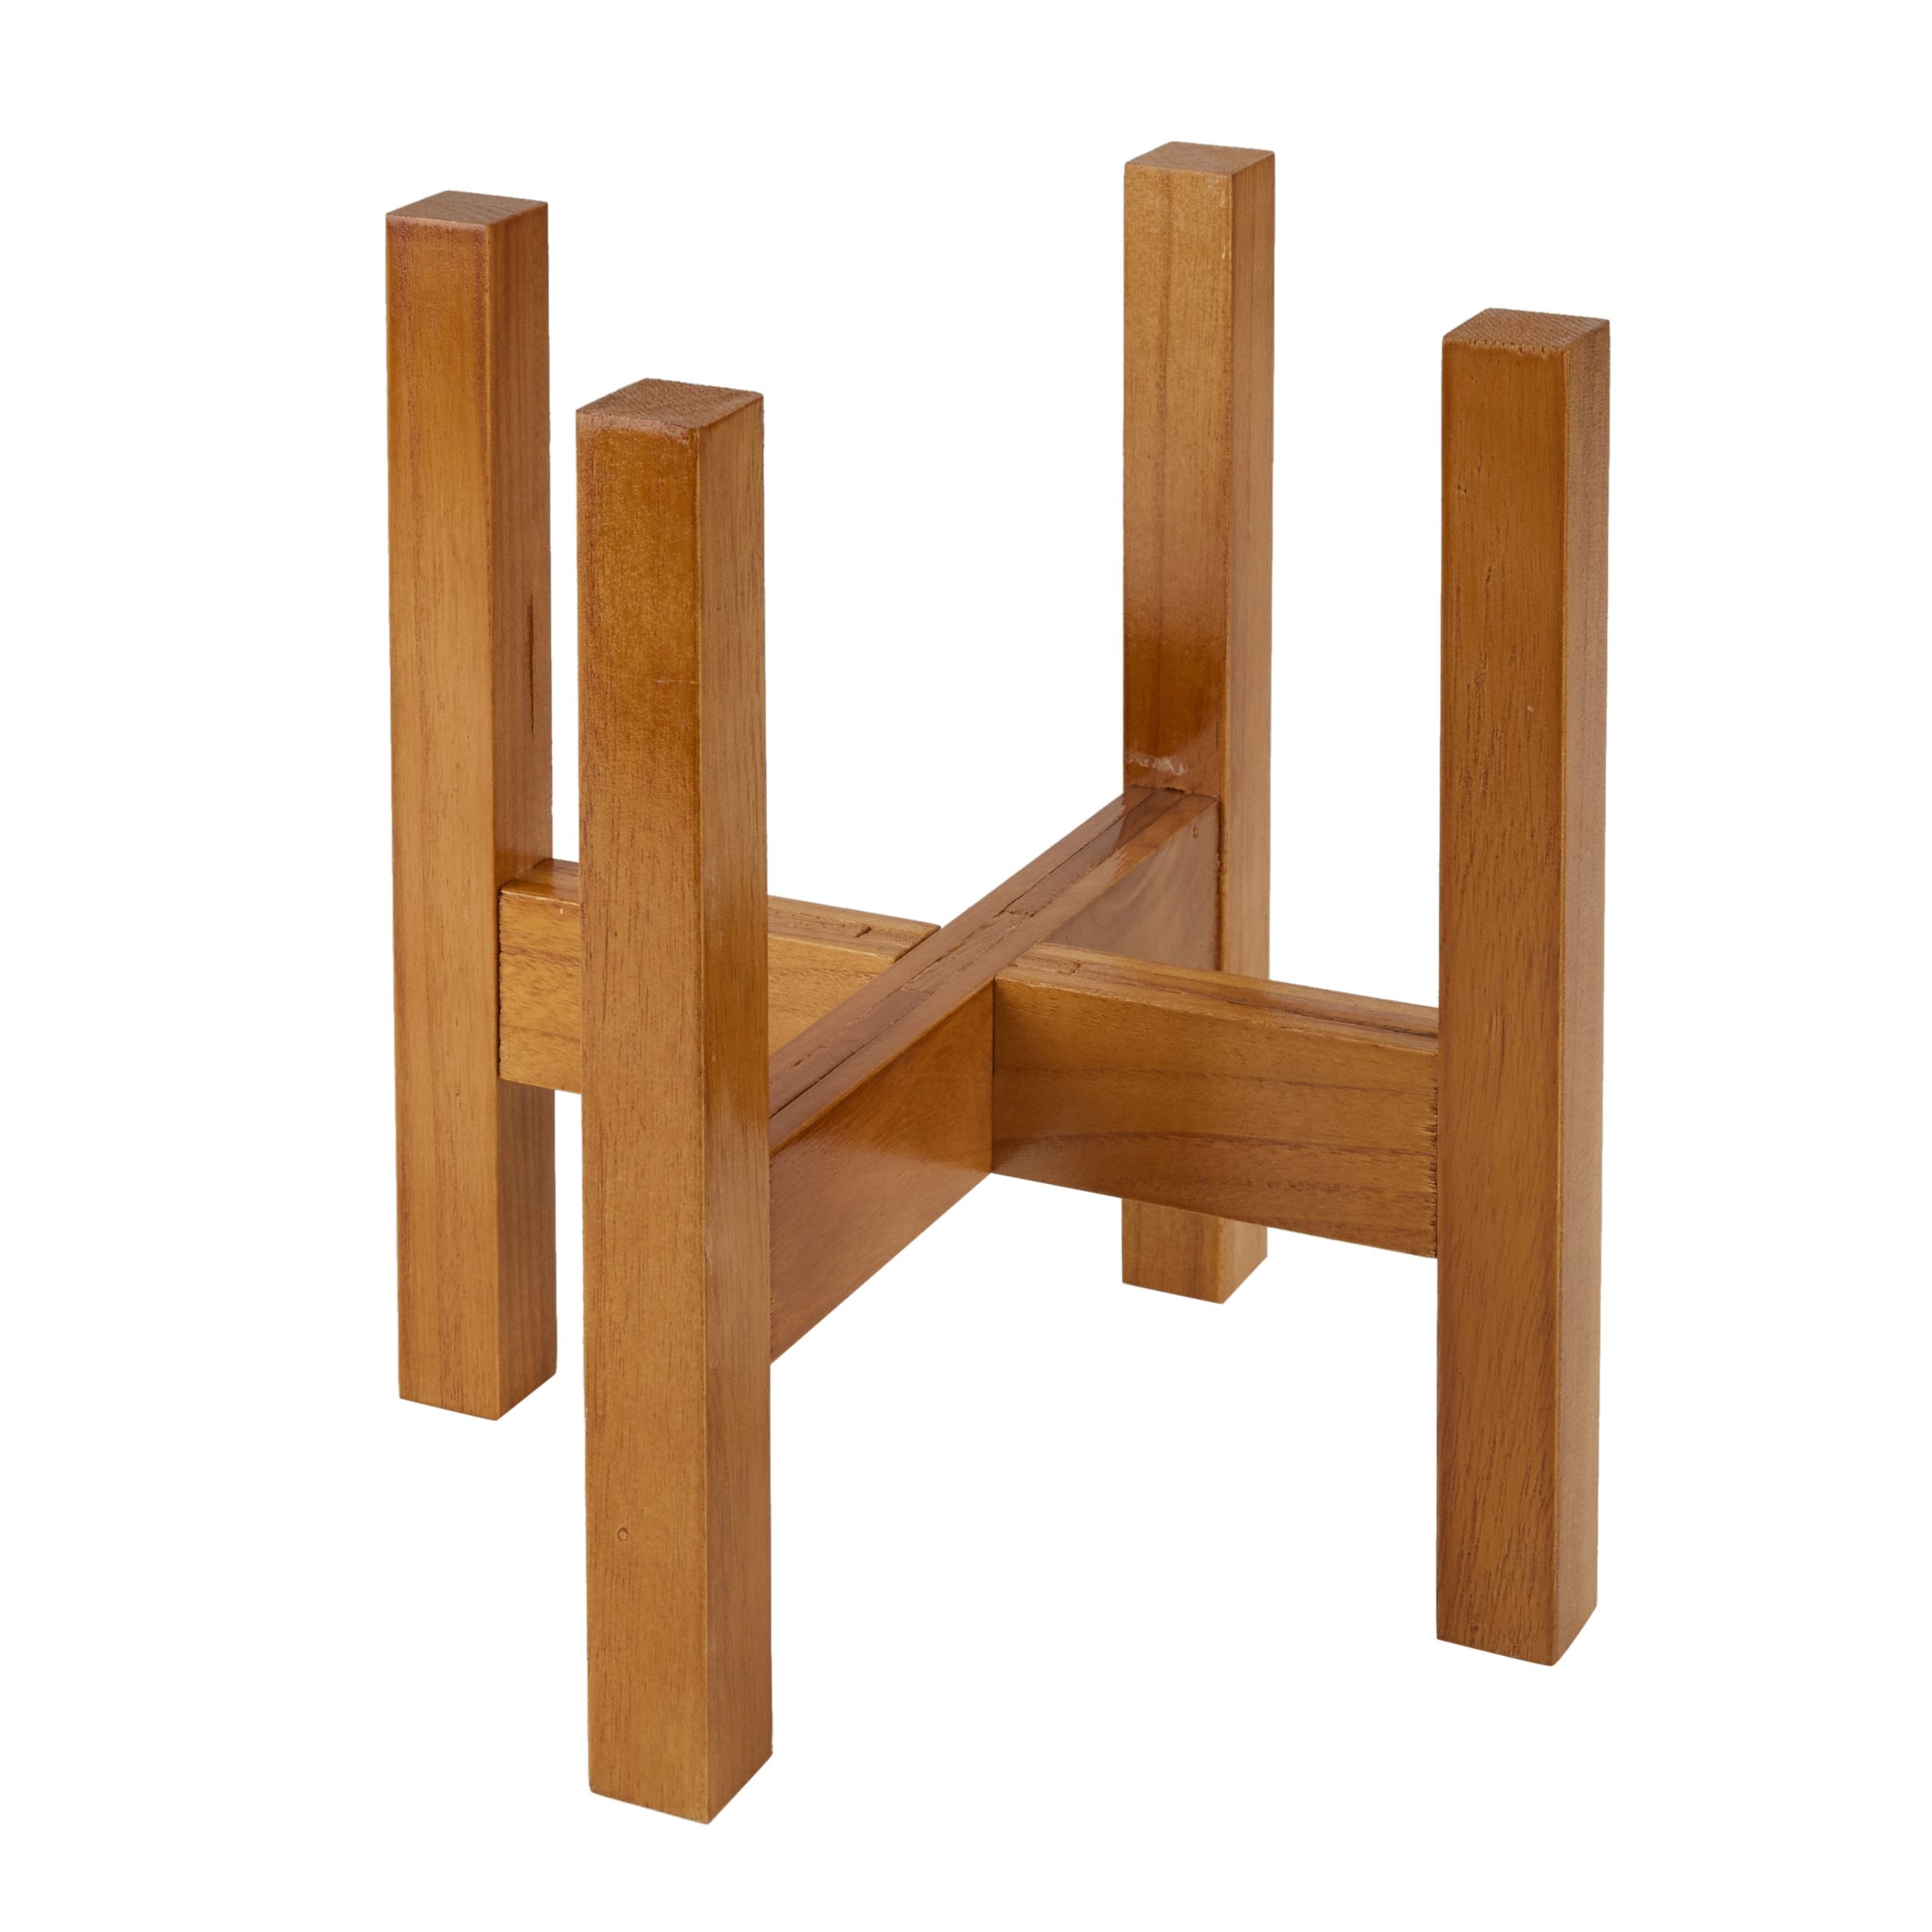 Wood Plant Stands At Lowes For Particle Board Plant Stands (View 12 of 15)